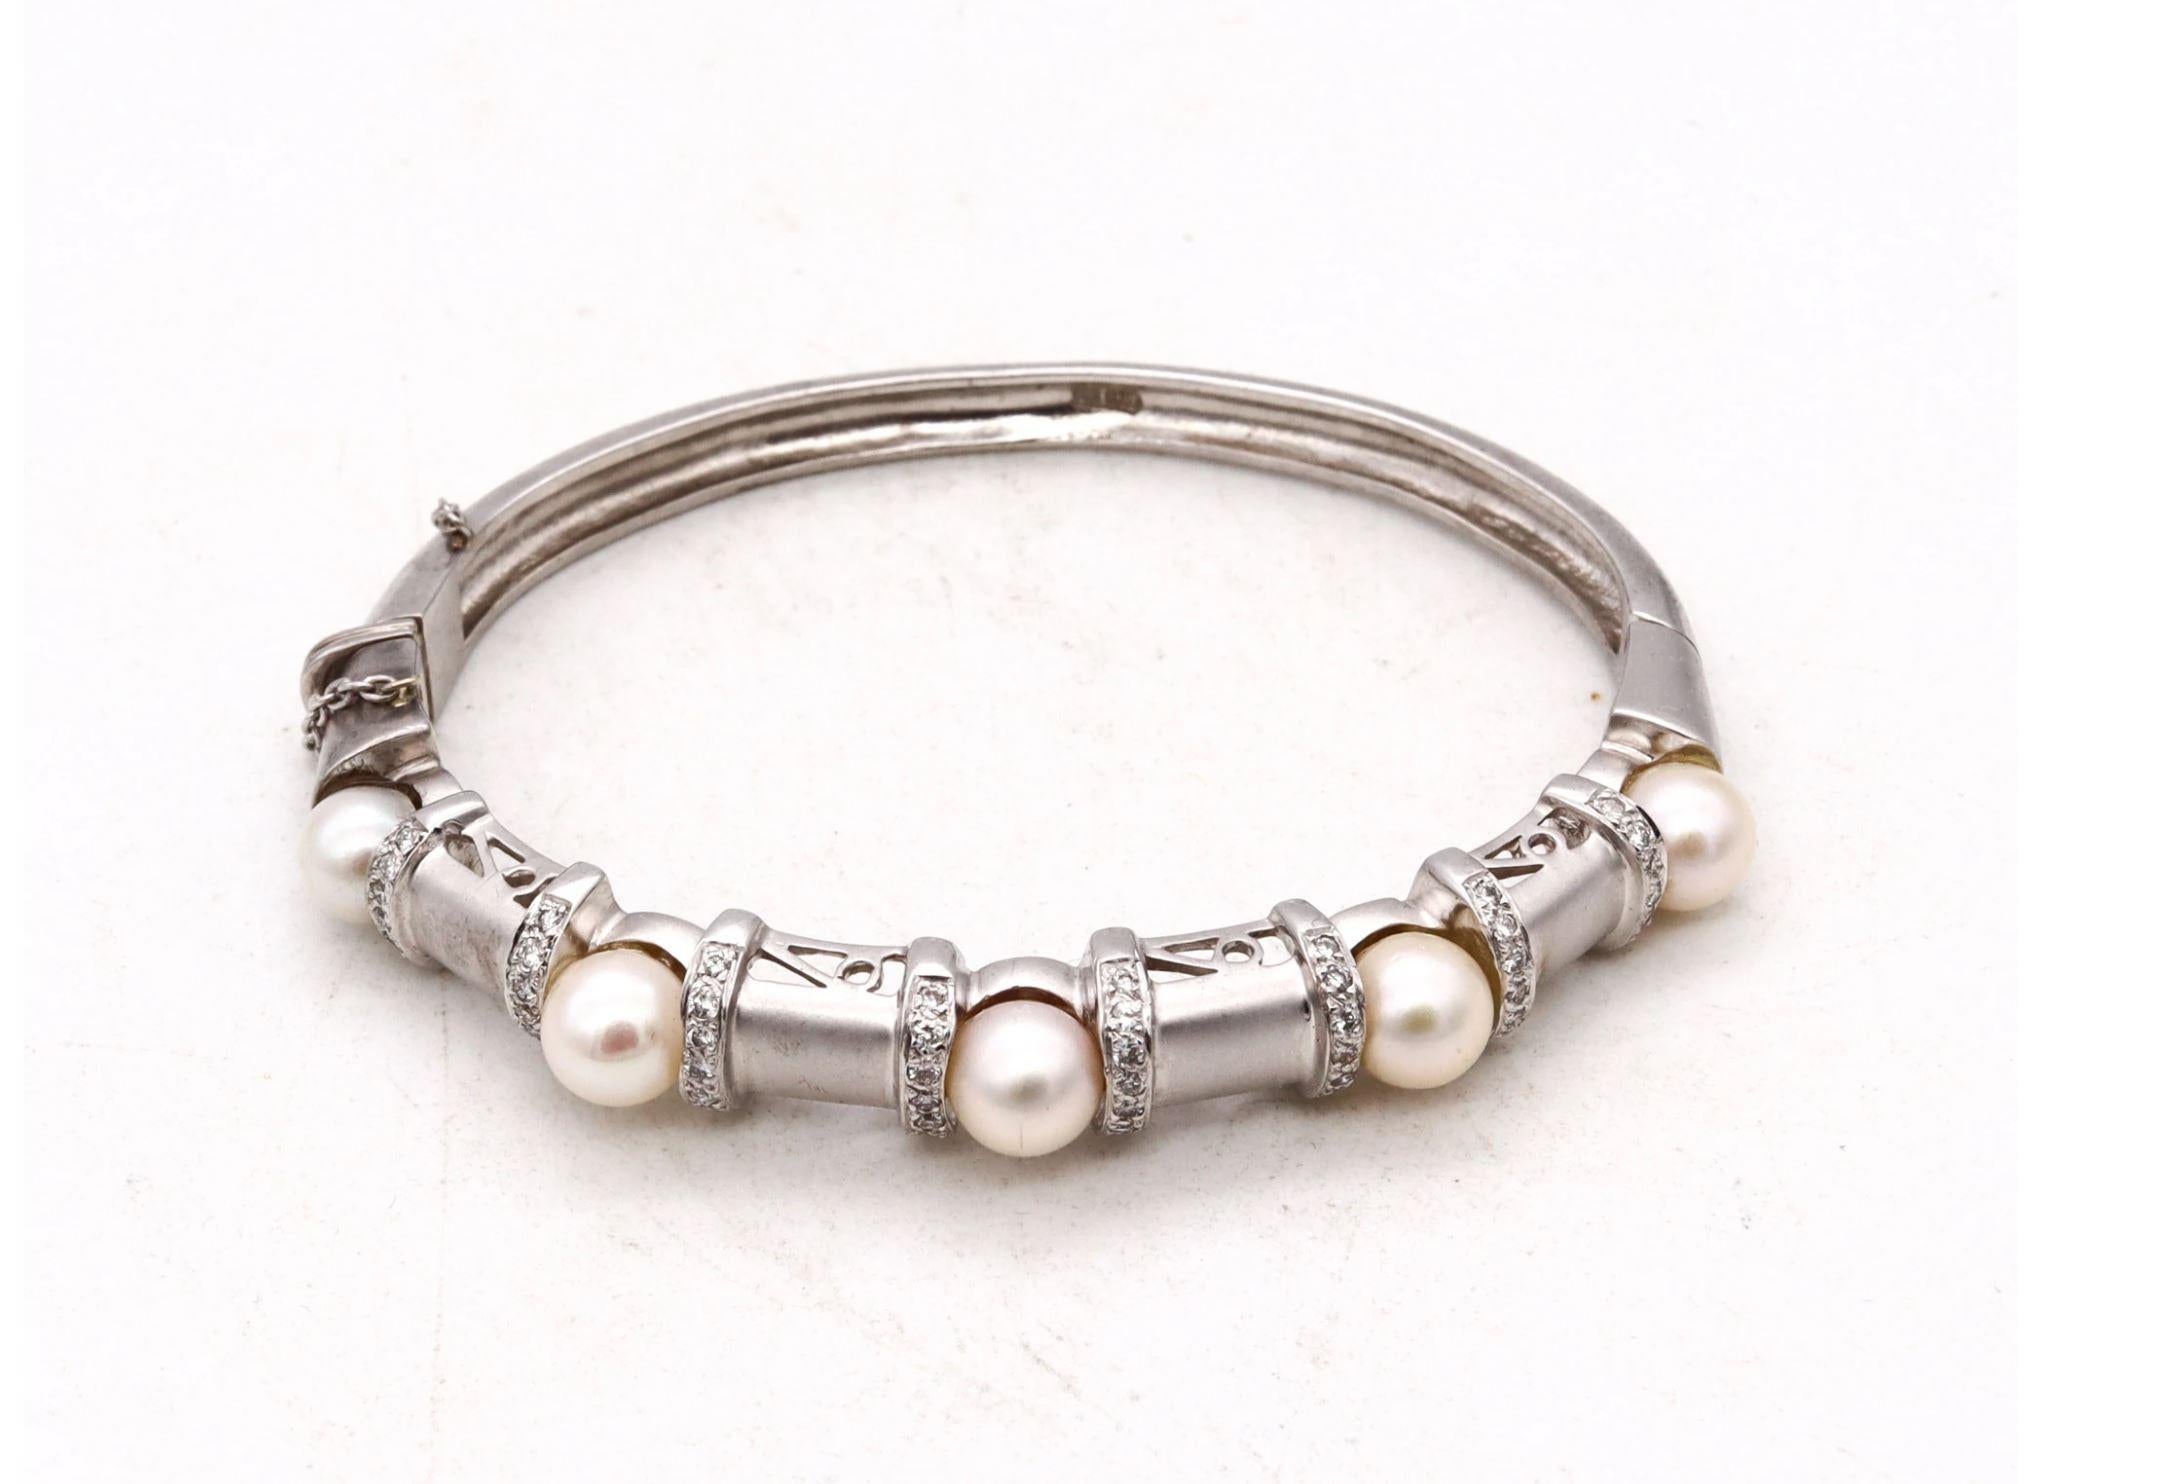 Jeweled bangle bracelet with Akoya Pearls.

A modern Italian piece, carefully crafted in solid white gold of 14 karats, with frosted satin finish. It is suited, with an invisible hinge with a boxed push lock for closure and a security